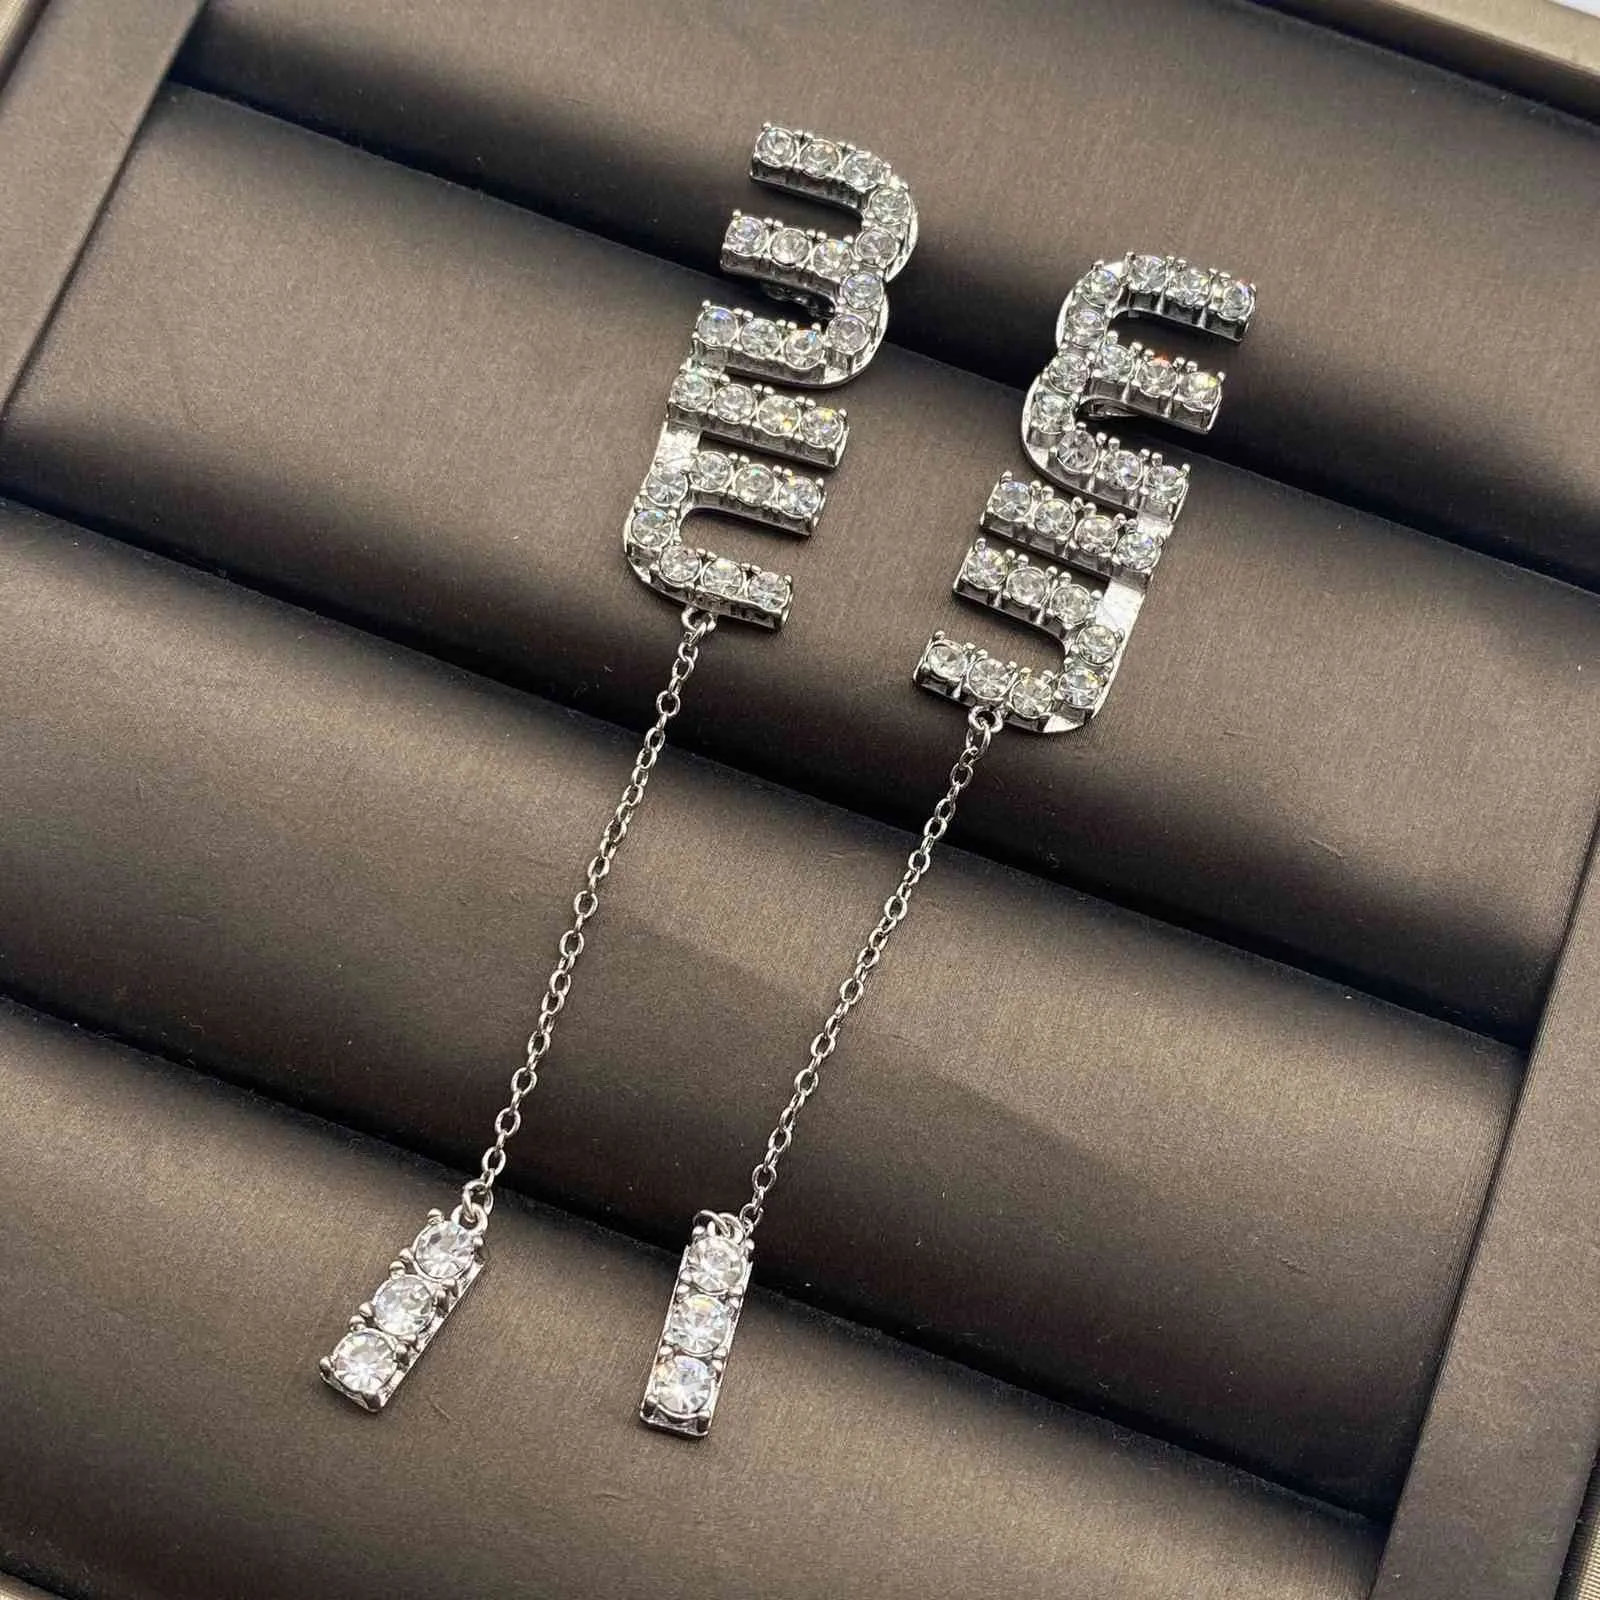 Design jewelry Miao new crystal letter necklace fashionable personality fashion clavicle chain with Rhinestone Earrings Bracelet f182E